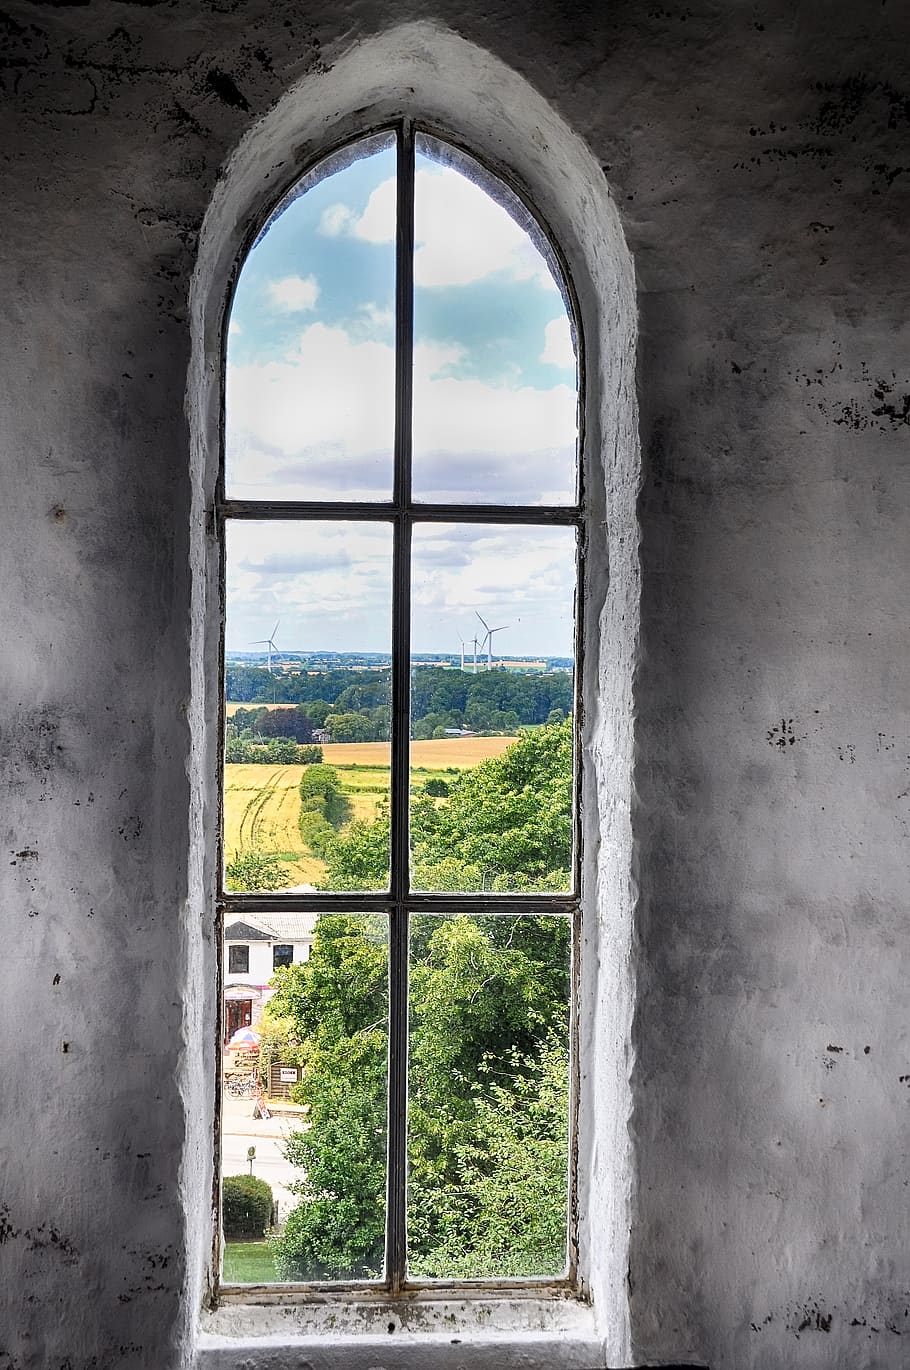 church window, church, window, outlook, architecture, grate, indoors, day, built structure, sky